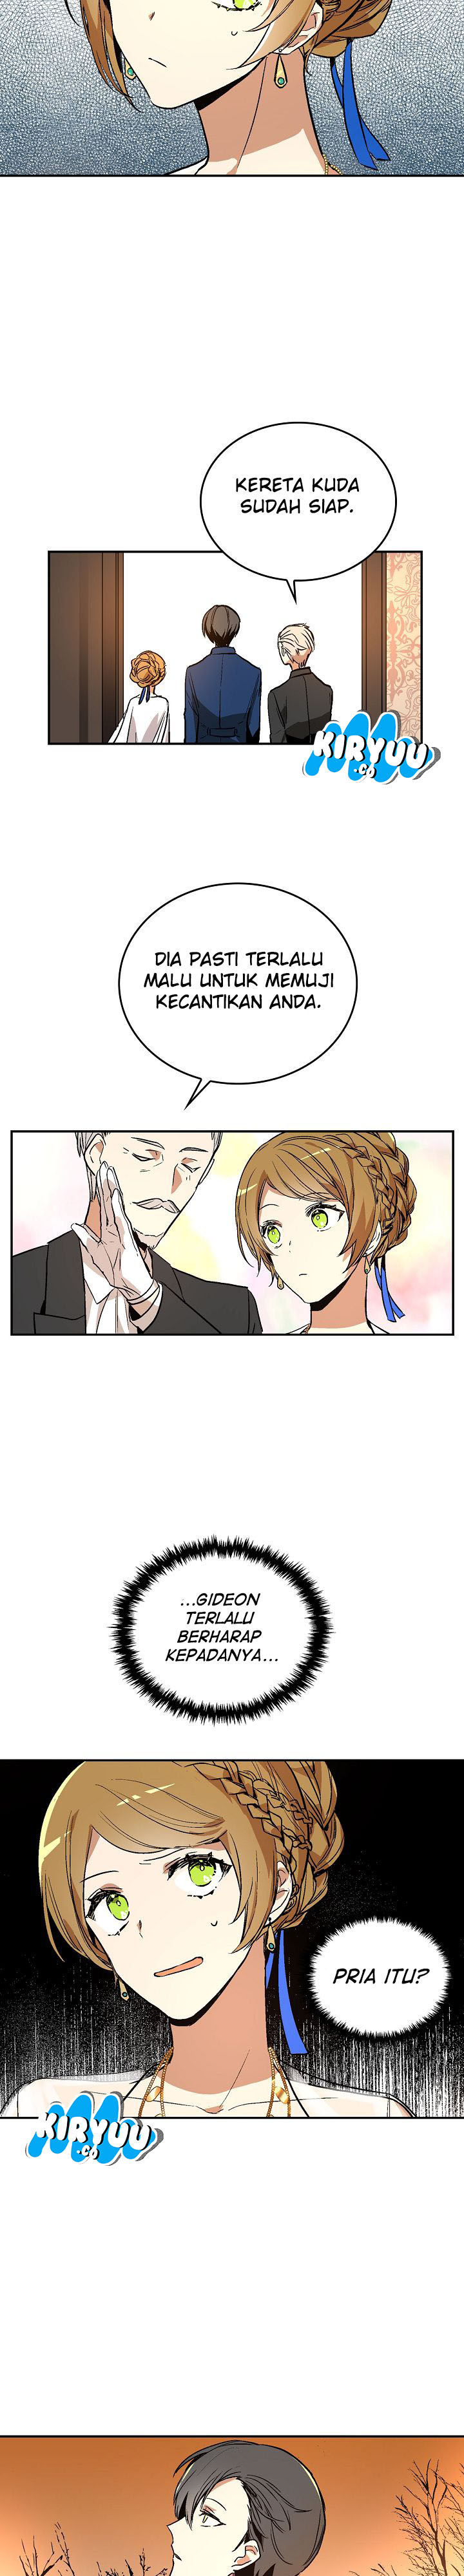 The Reason Why Raeliana Ended up at the Duke’s Mansion Chapter 14